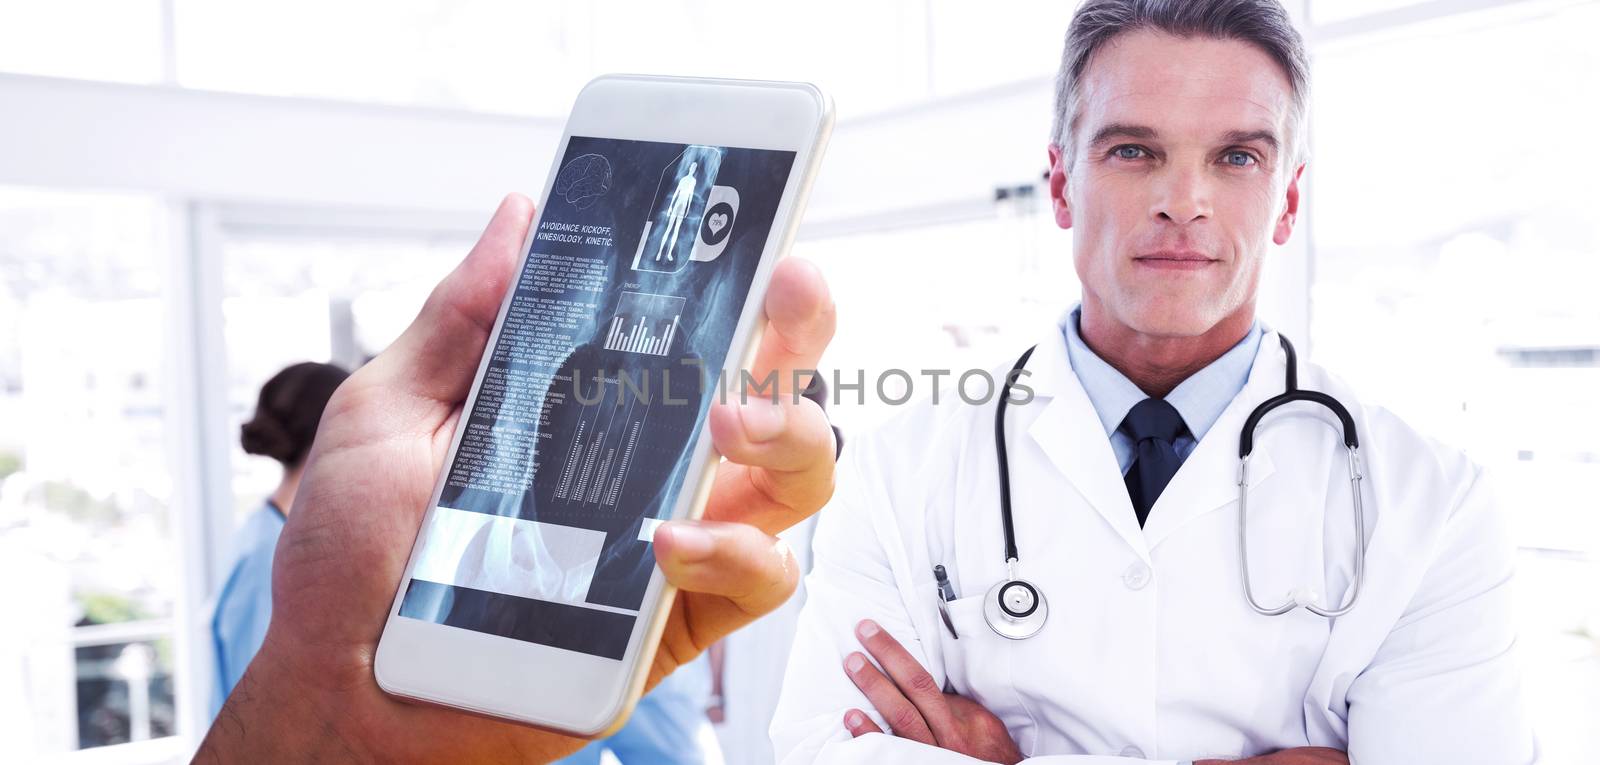 hand holding smartphone against smiling doctor with arms crossed